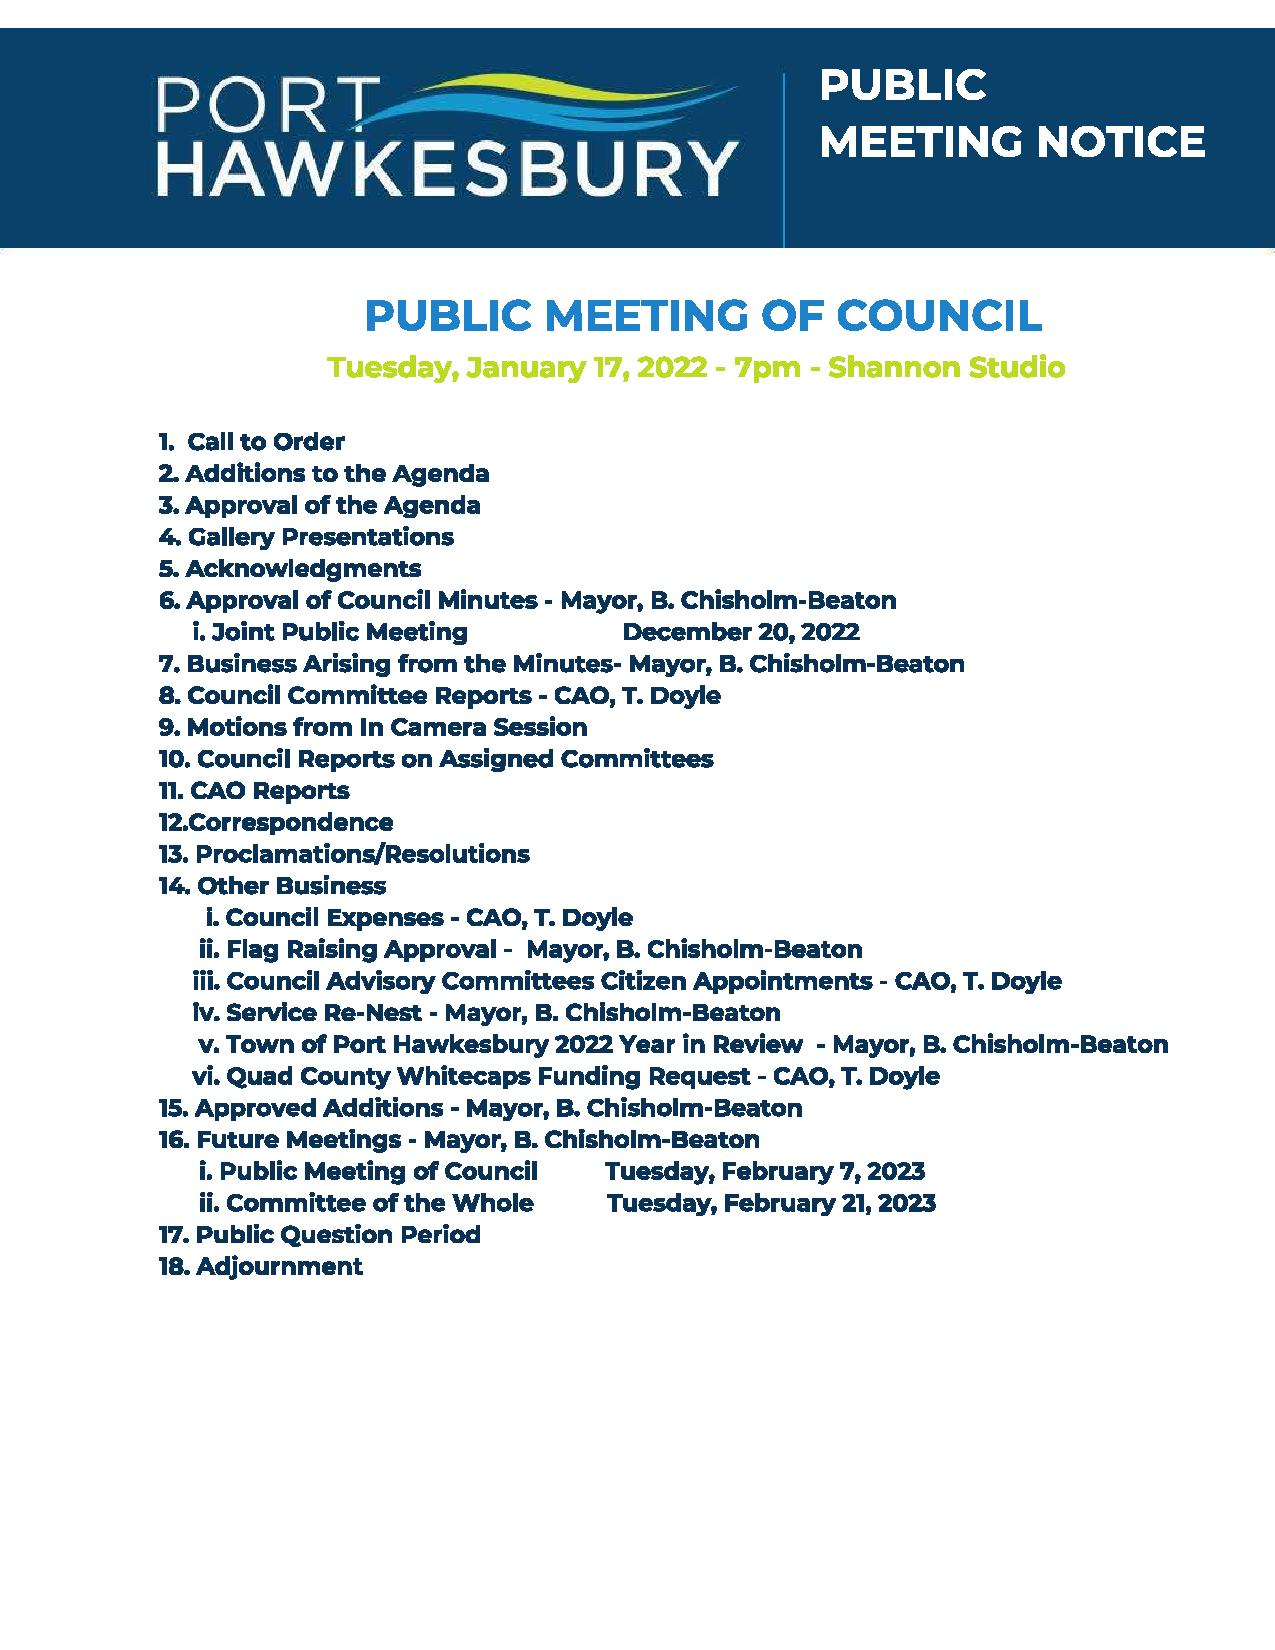 Joint Public Meeting of Council / Committee of the Whole – January 17, 2023